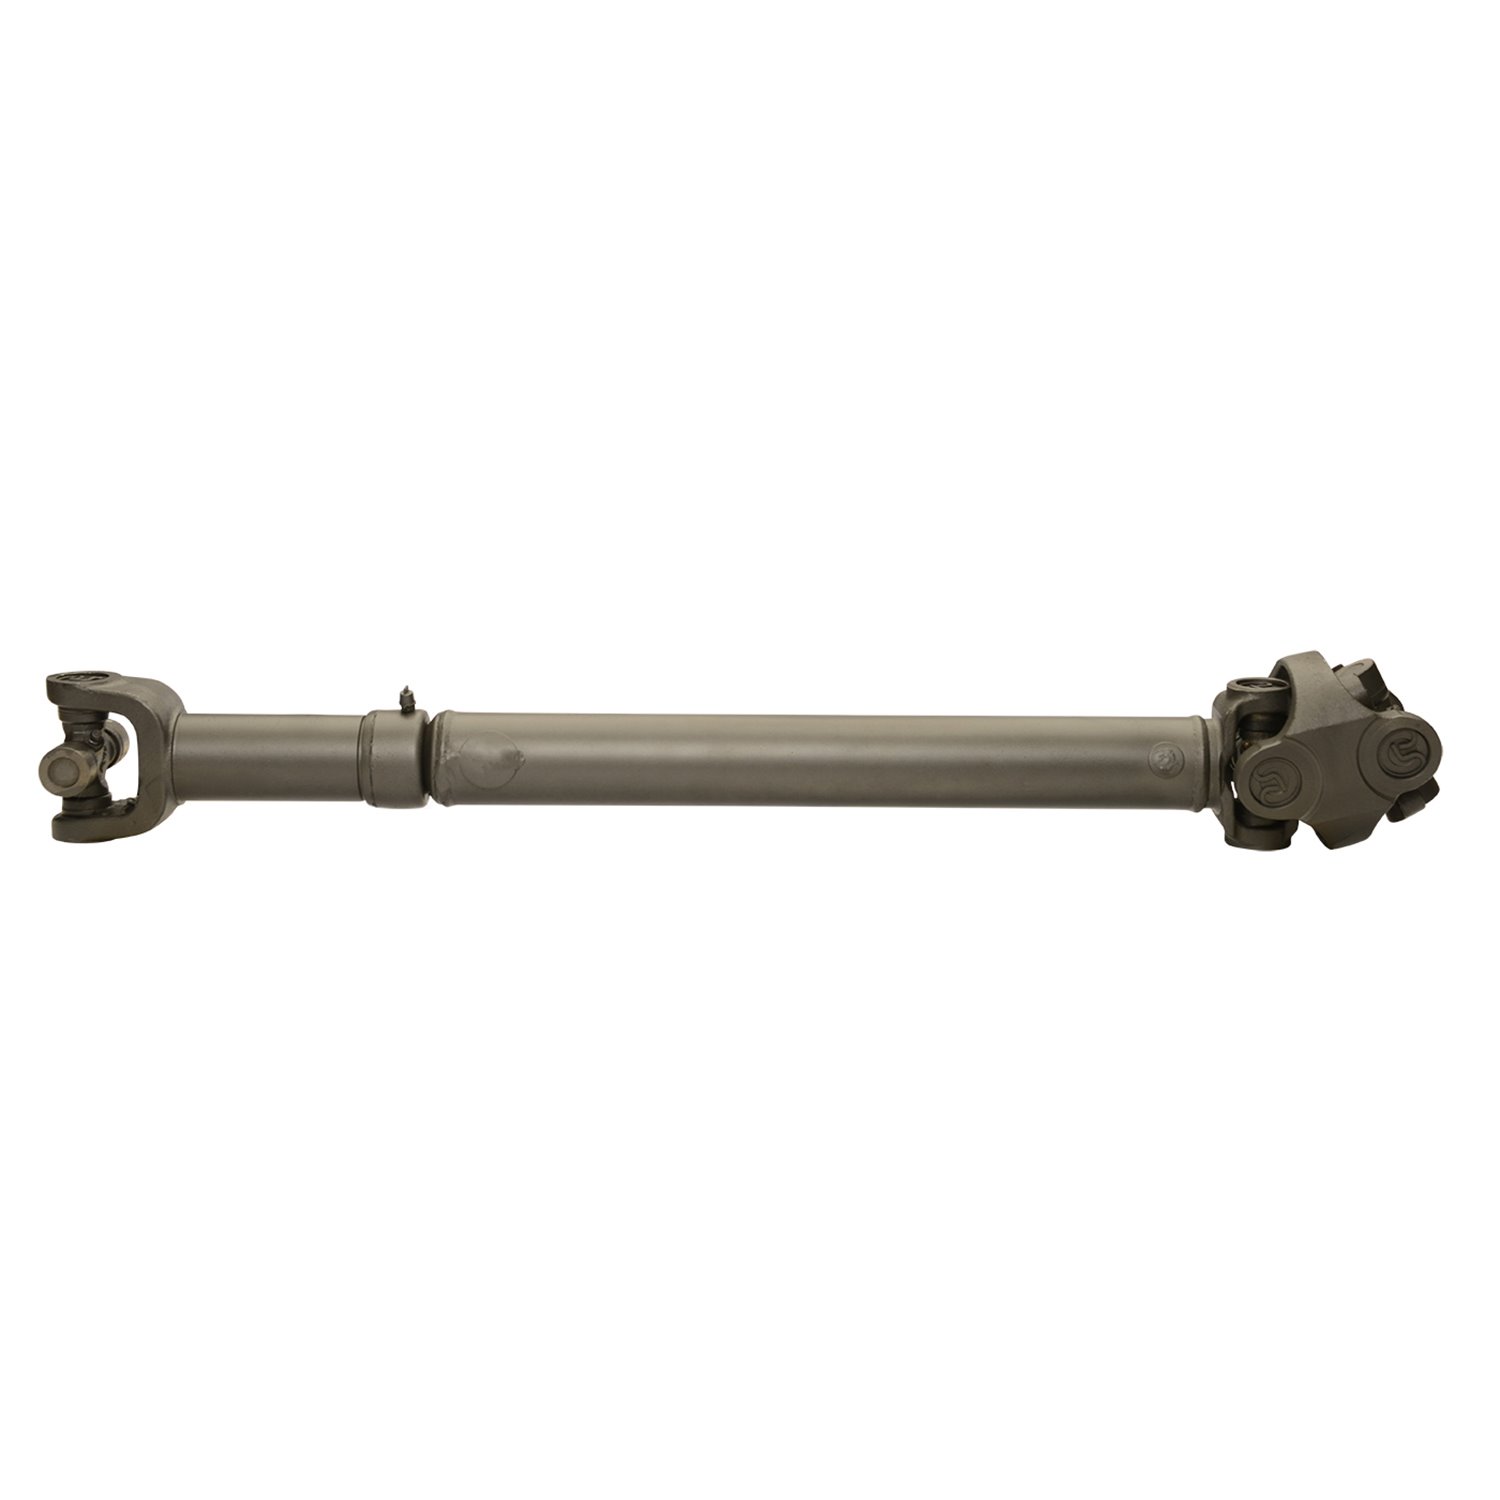 USA Standard ZDS9623 Front Driveshaft, For Explorer/Mountaineer, 28.25 in. Center-To-Center